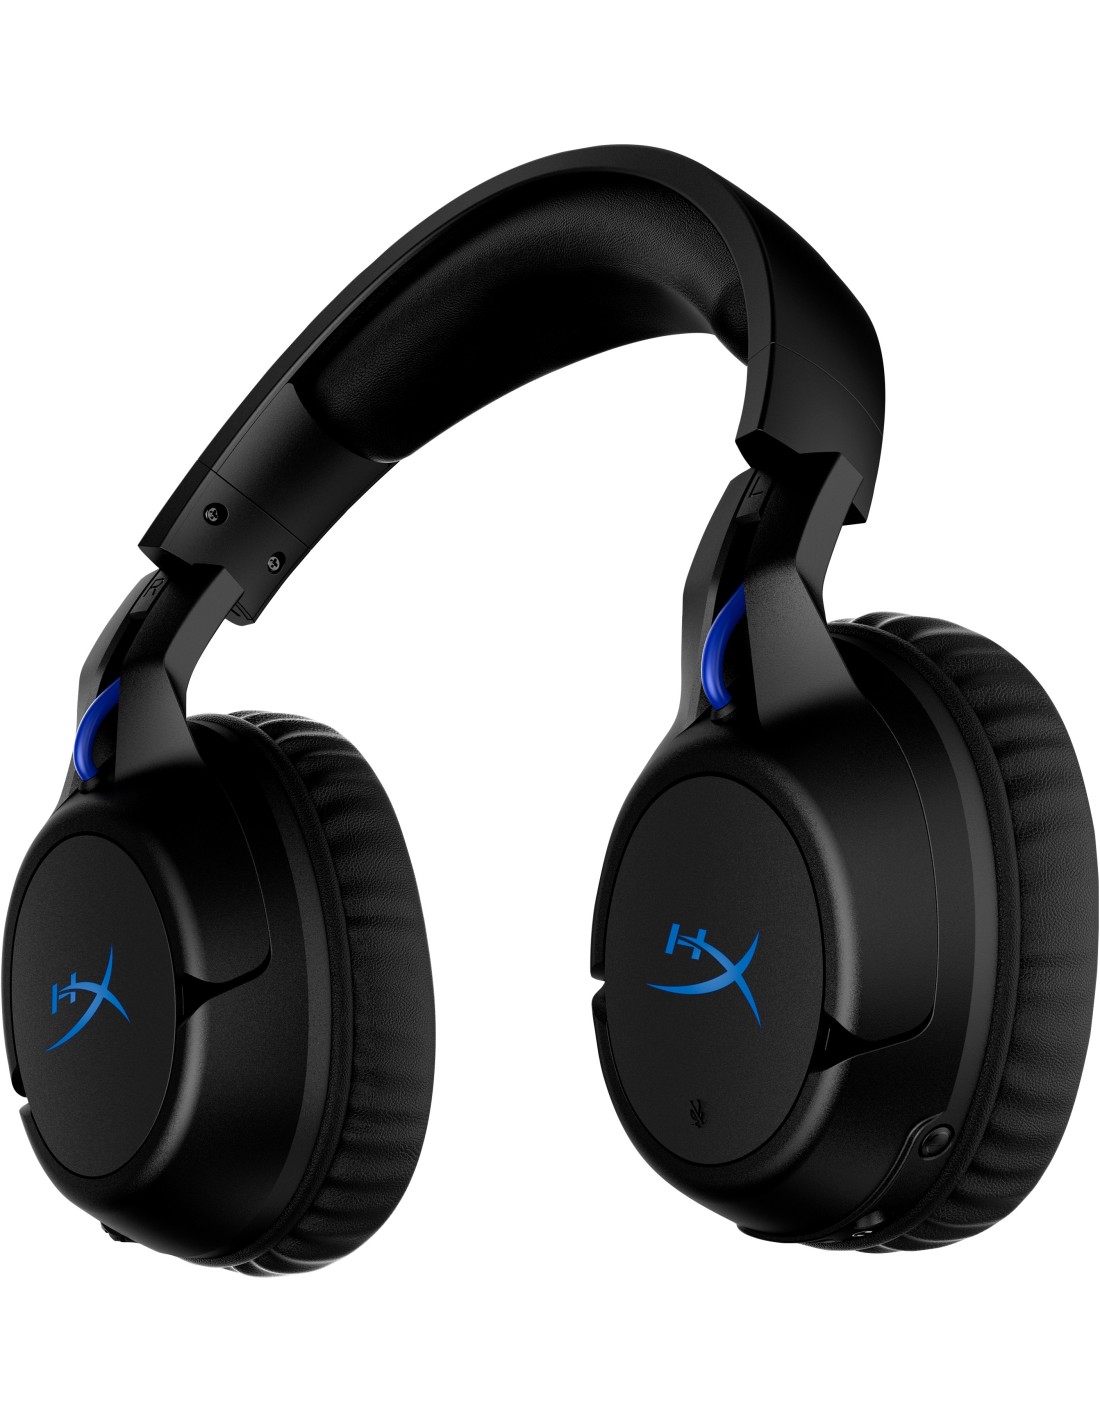 AURICULARES GAMING INALÁMBRICOS PULSE 3D SONY PARA PS4 Y PS5 USB - Negro —  Cover company